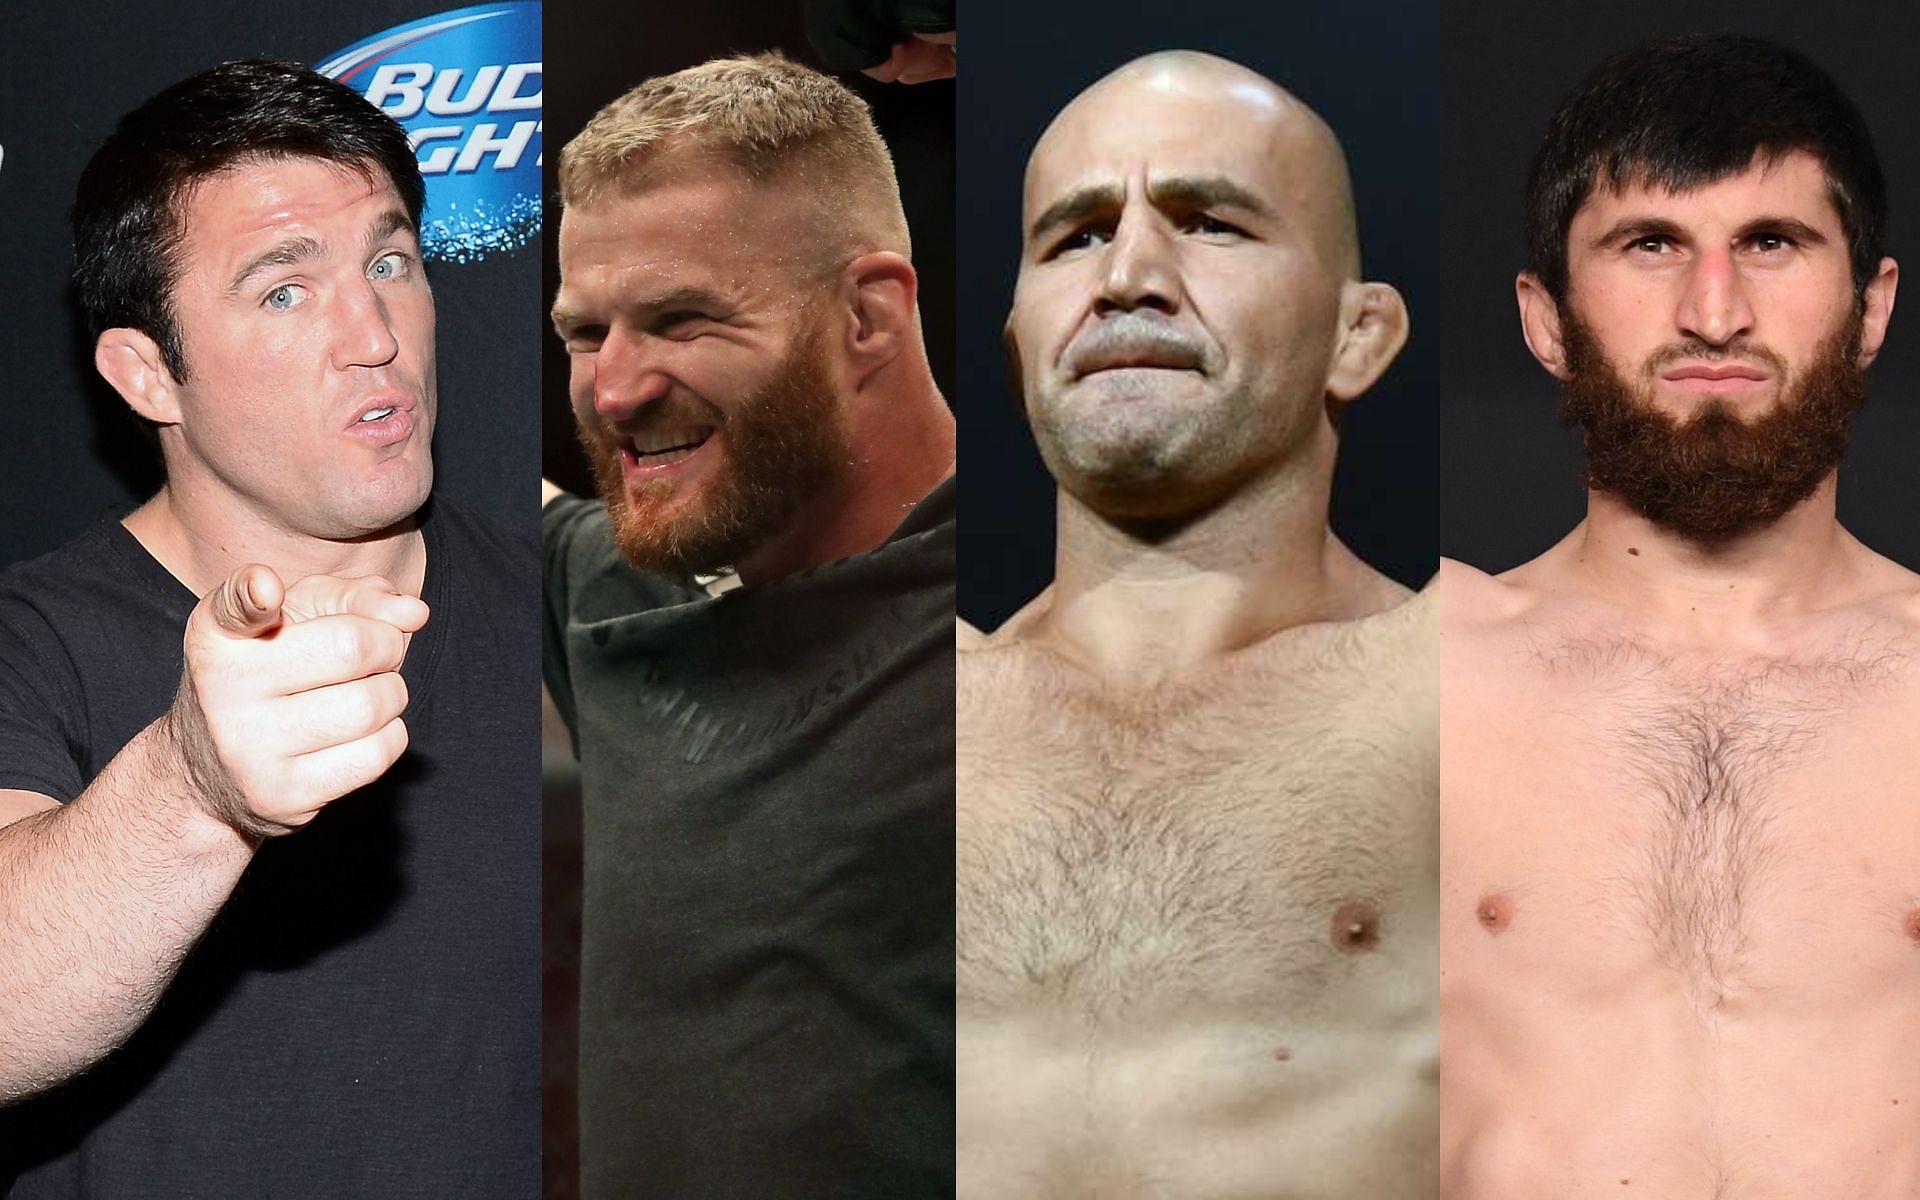 Left to right: Chael Sonnen, Jan Blachowicz, Glover Teixeira, Magomed Ankalaev [Credits: Getty]